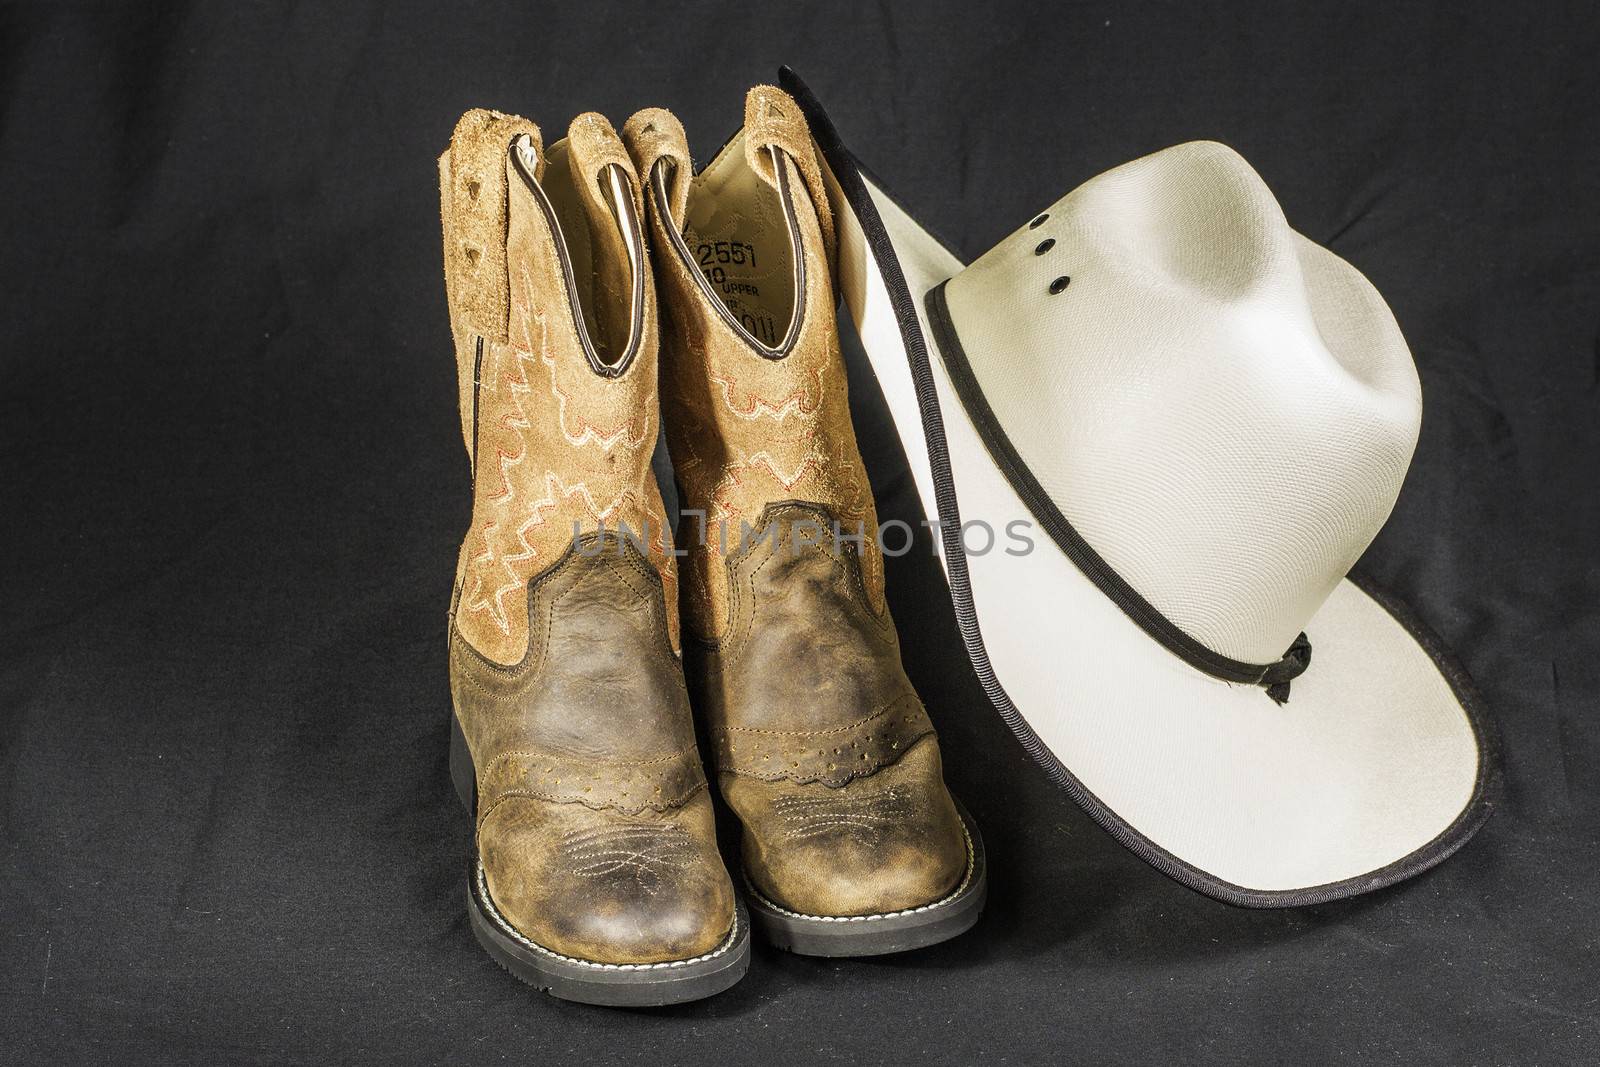 A close shot of a pair of boots and a cowboy hat.